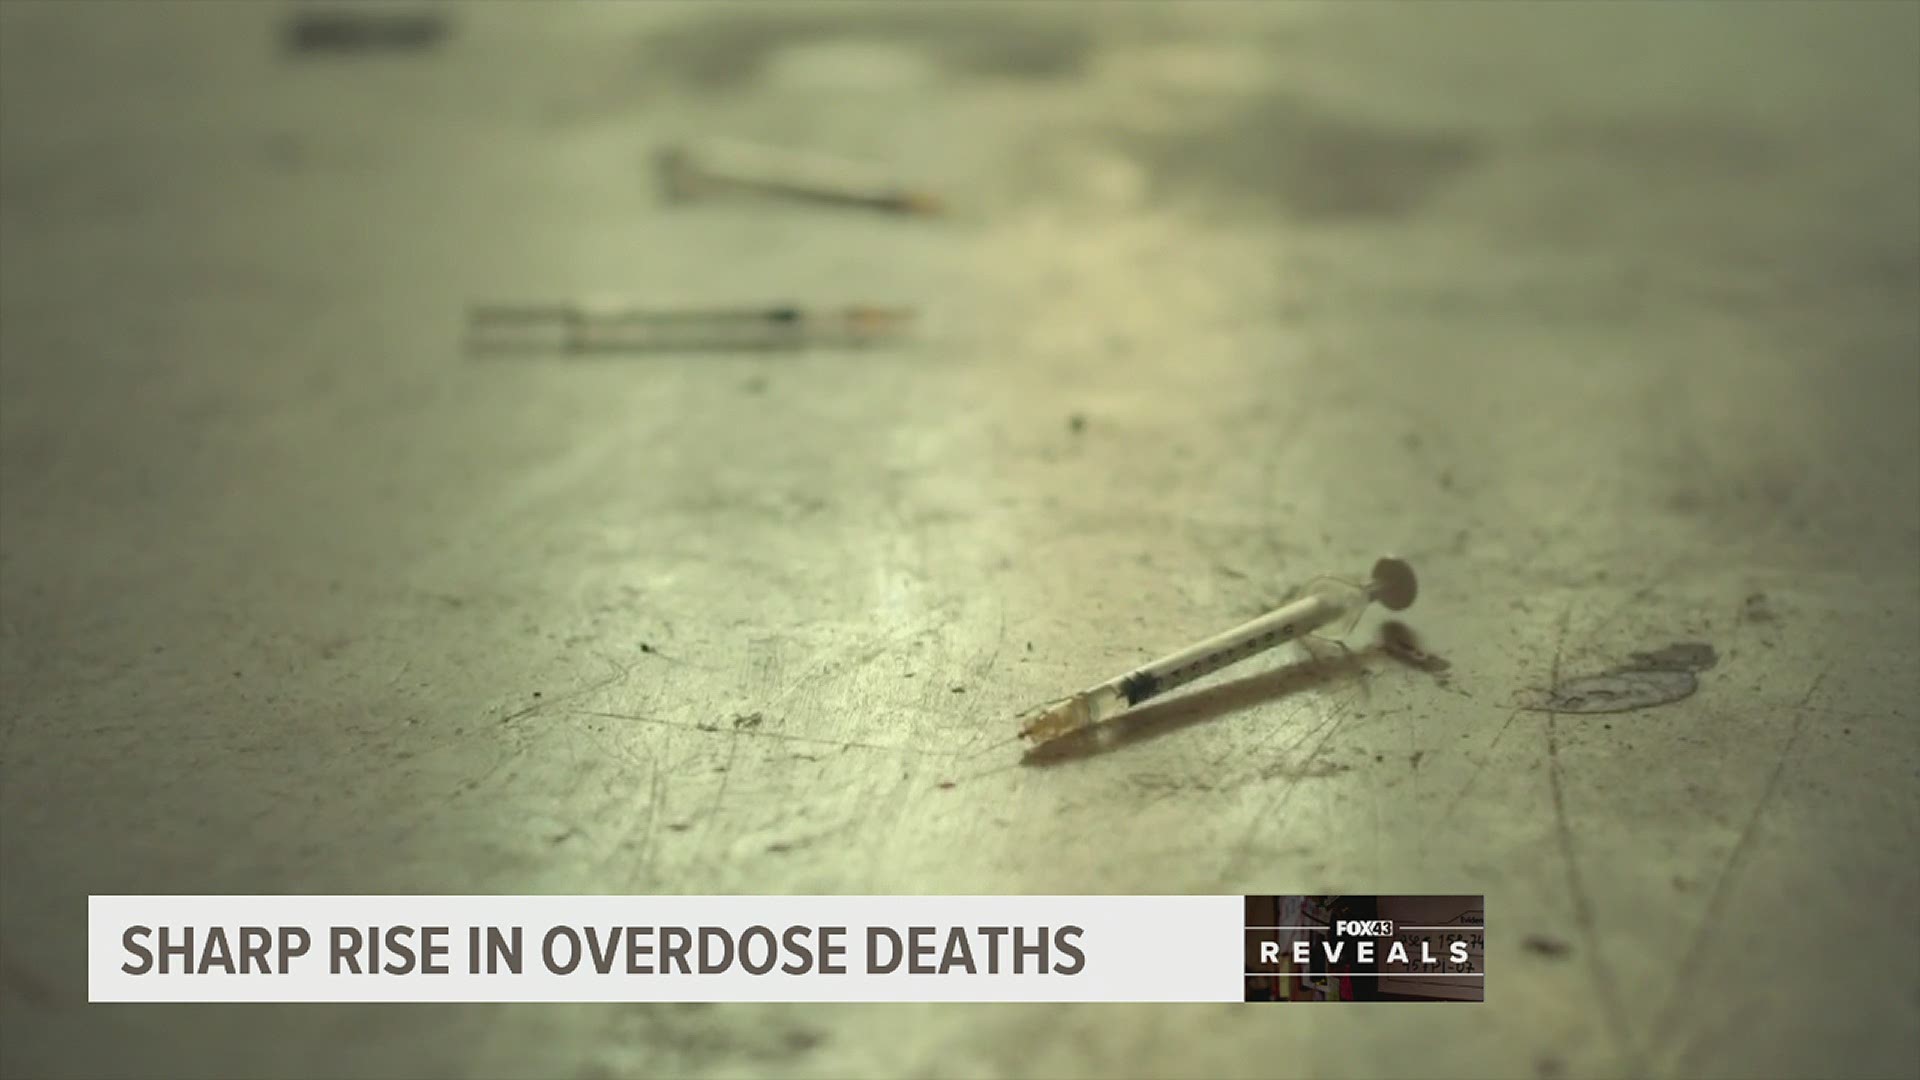 Coroners are reporting a steady increase of drug-related deaths. FOX43 Reveals how the COVID-19 pandemic may not be the only reason behind the spike.